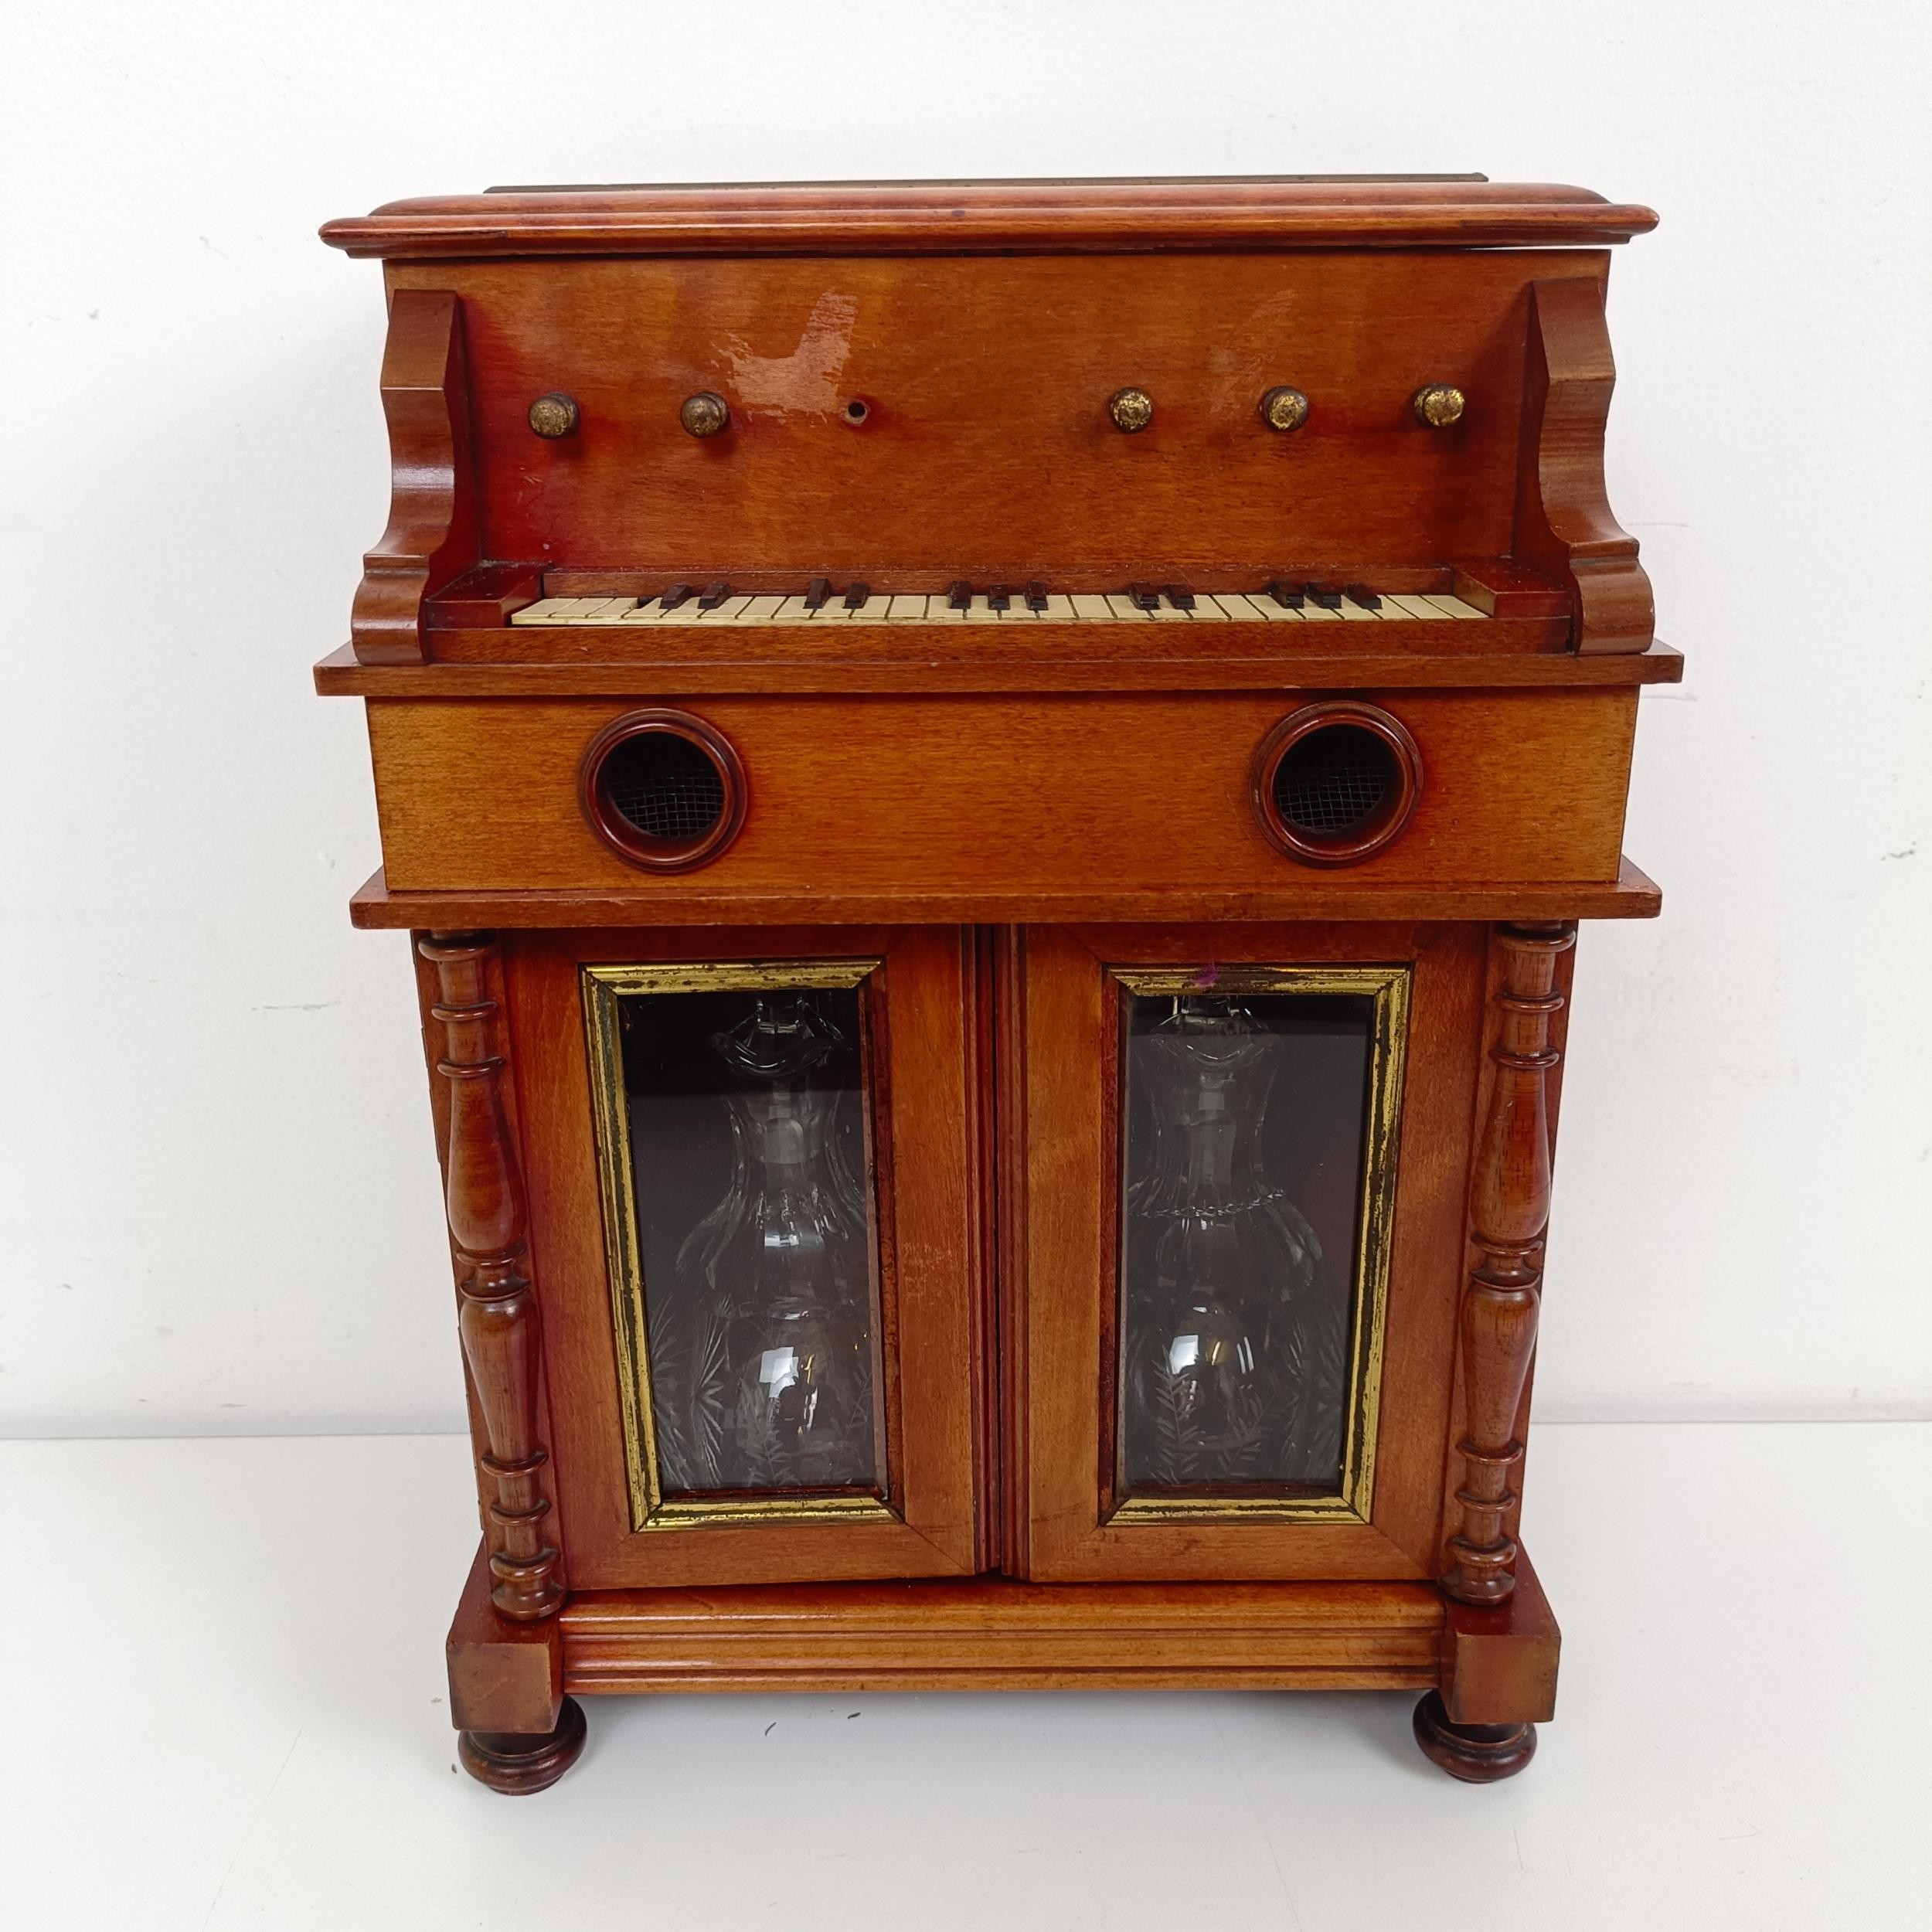 An early 20th century Continental musical tantalus/liqueur cabinet, in the form of a piano or organ,